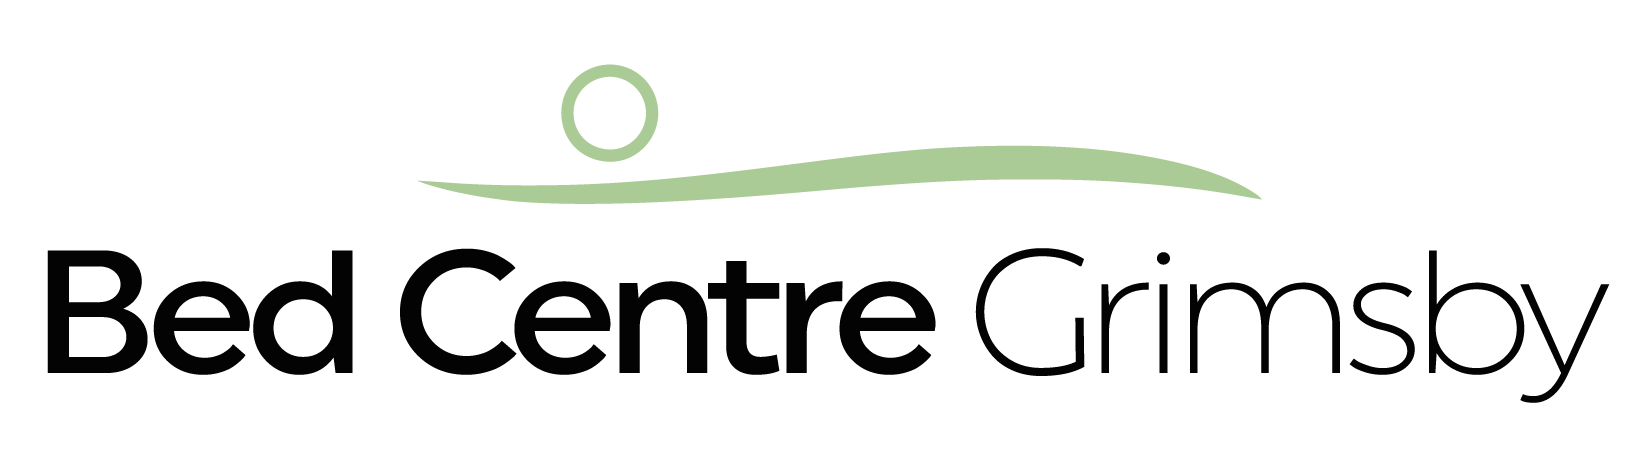 Bed Centre Grimsby Logo